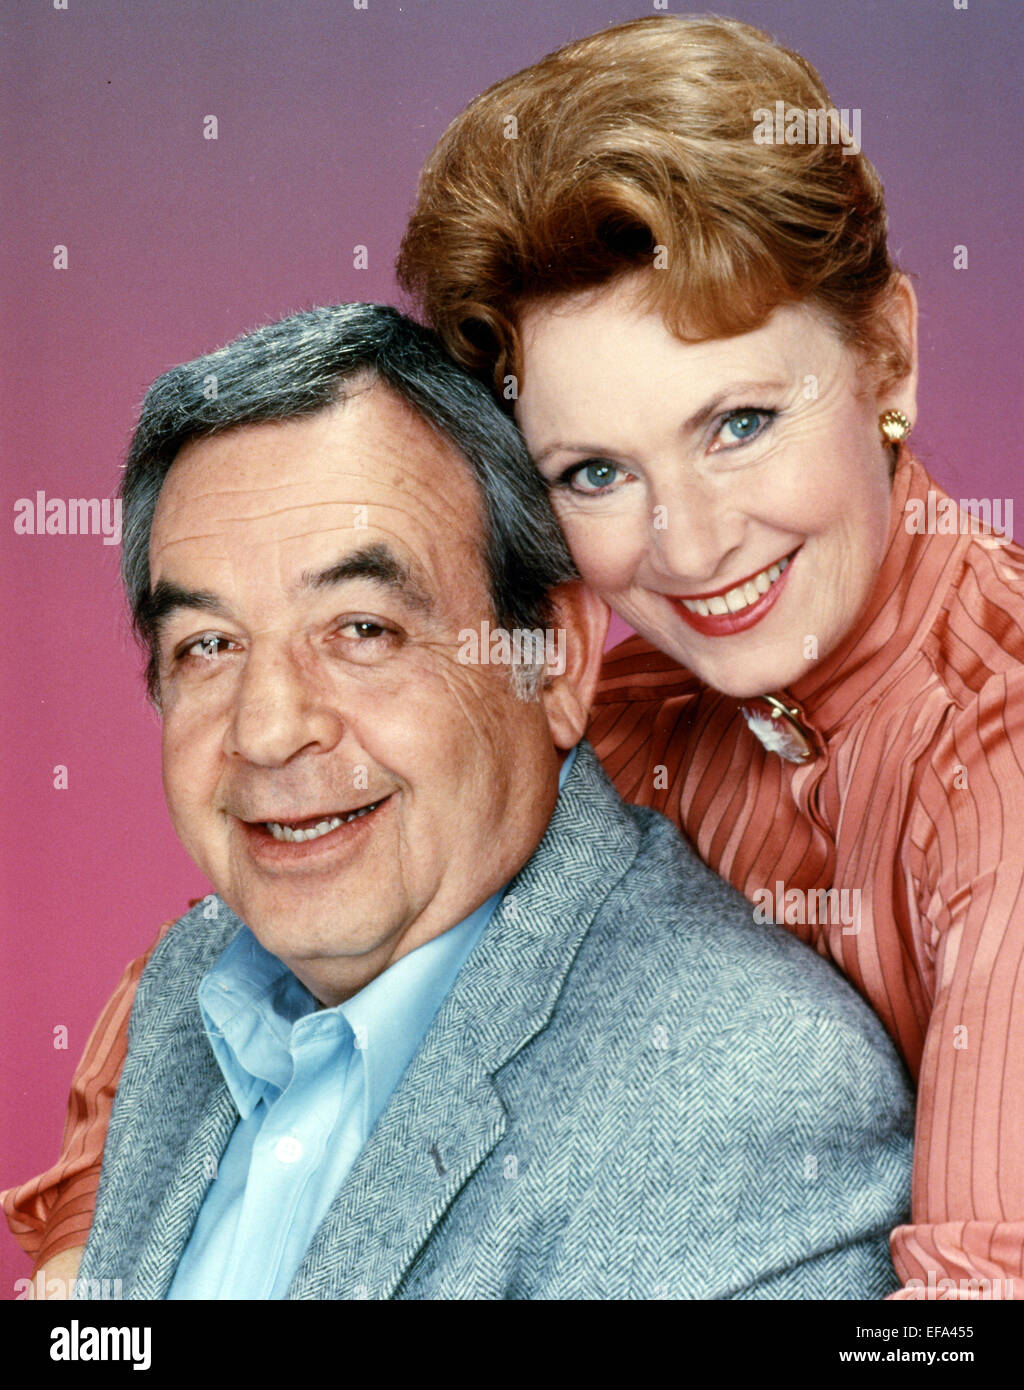 Tom Bosley High Resolution Stock Photography and Images - Alamy